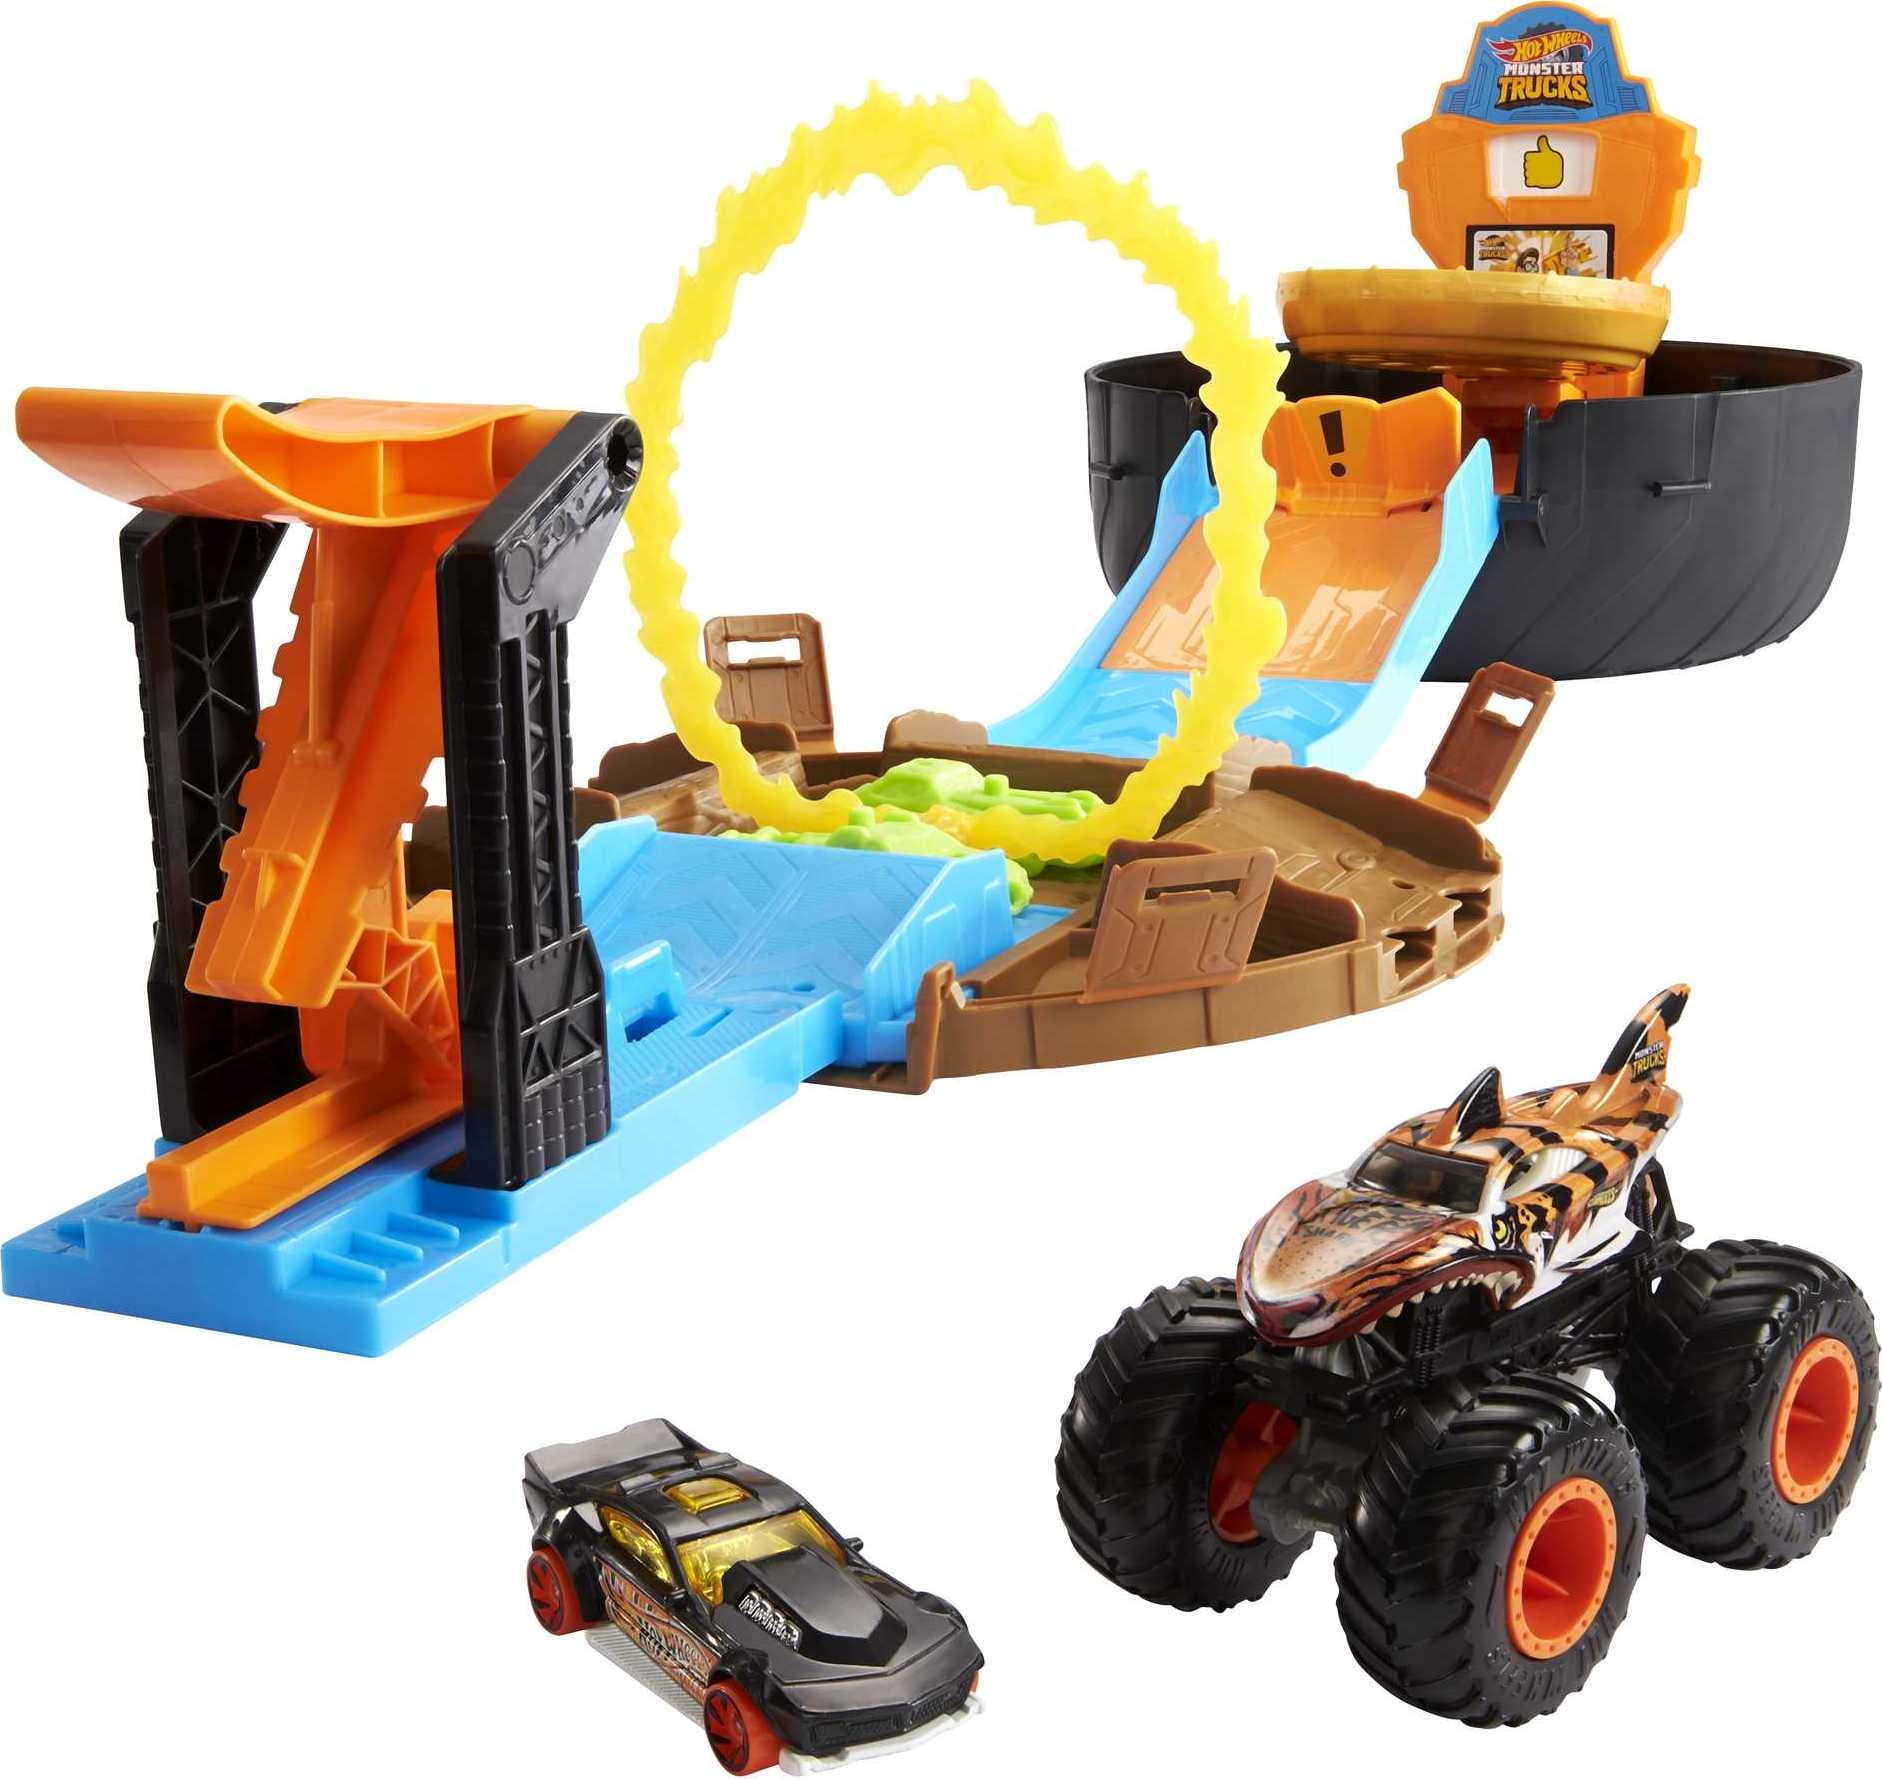 Hot Wheels Monster Trucks Stunt Tire Playset with 1:64 Scale Toy Car ...